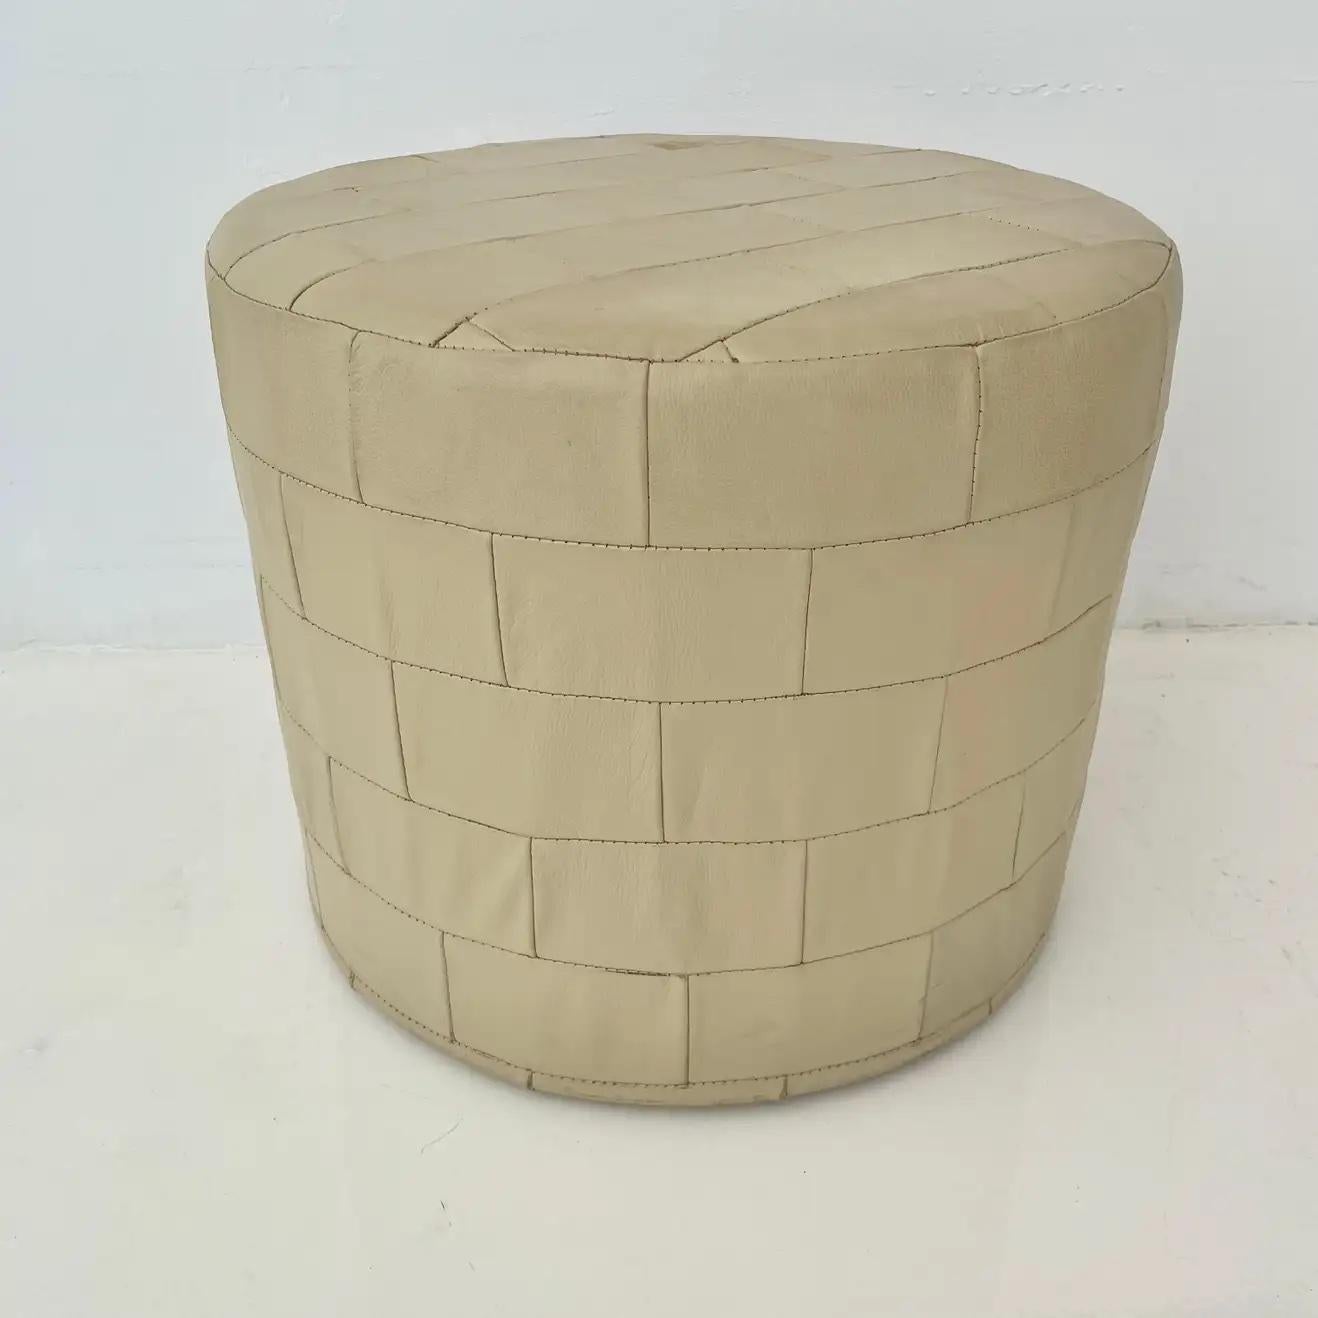 Classic patchwork leather ottoman by De Sede in a chic cream finish. Comfortable accent piece that fits in any room. Good vintage condition.